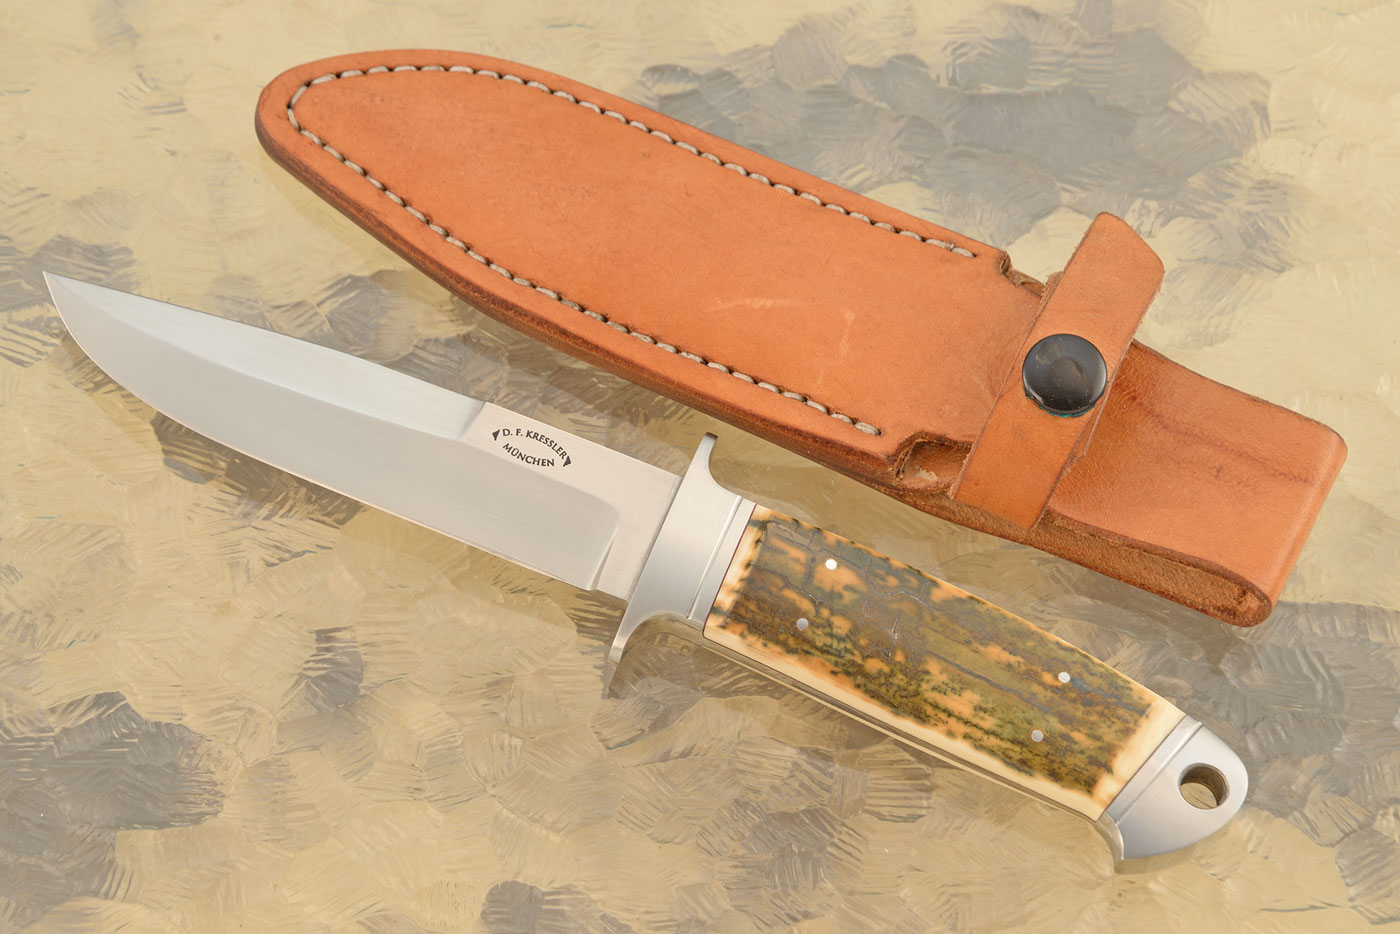 Integral Chute Knife with Mammoth Ivory